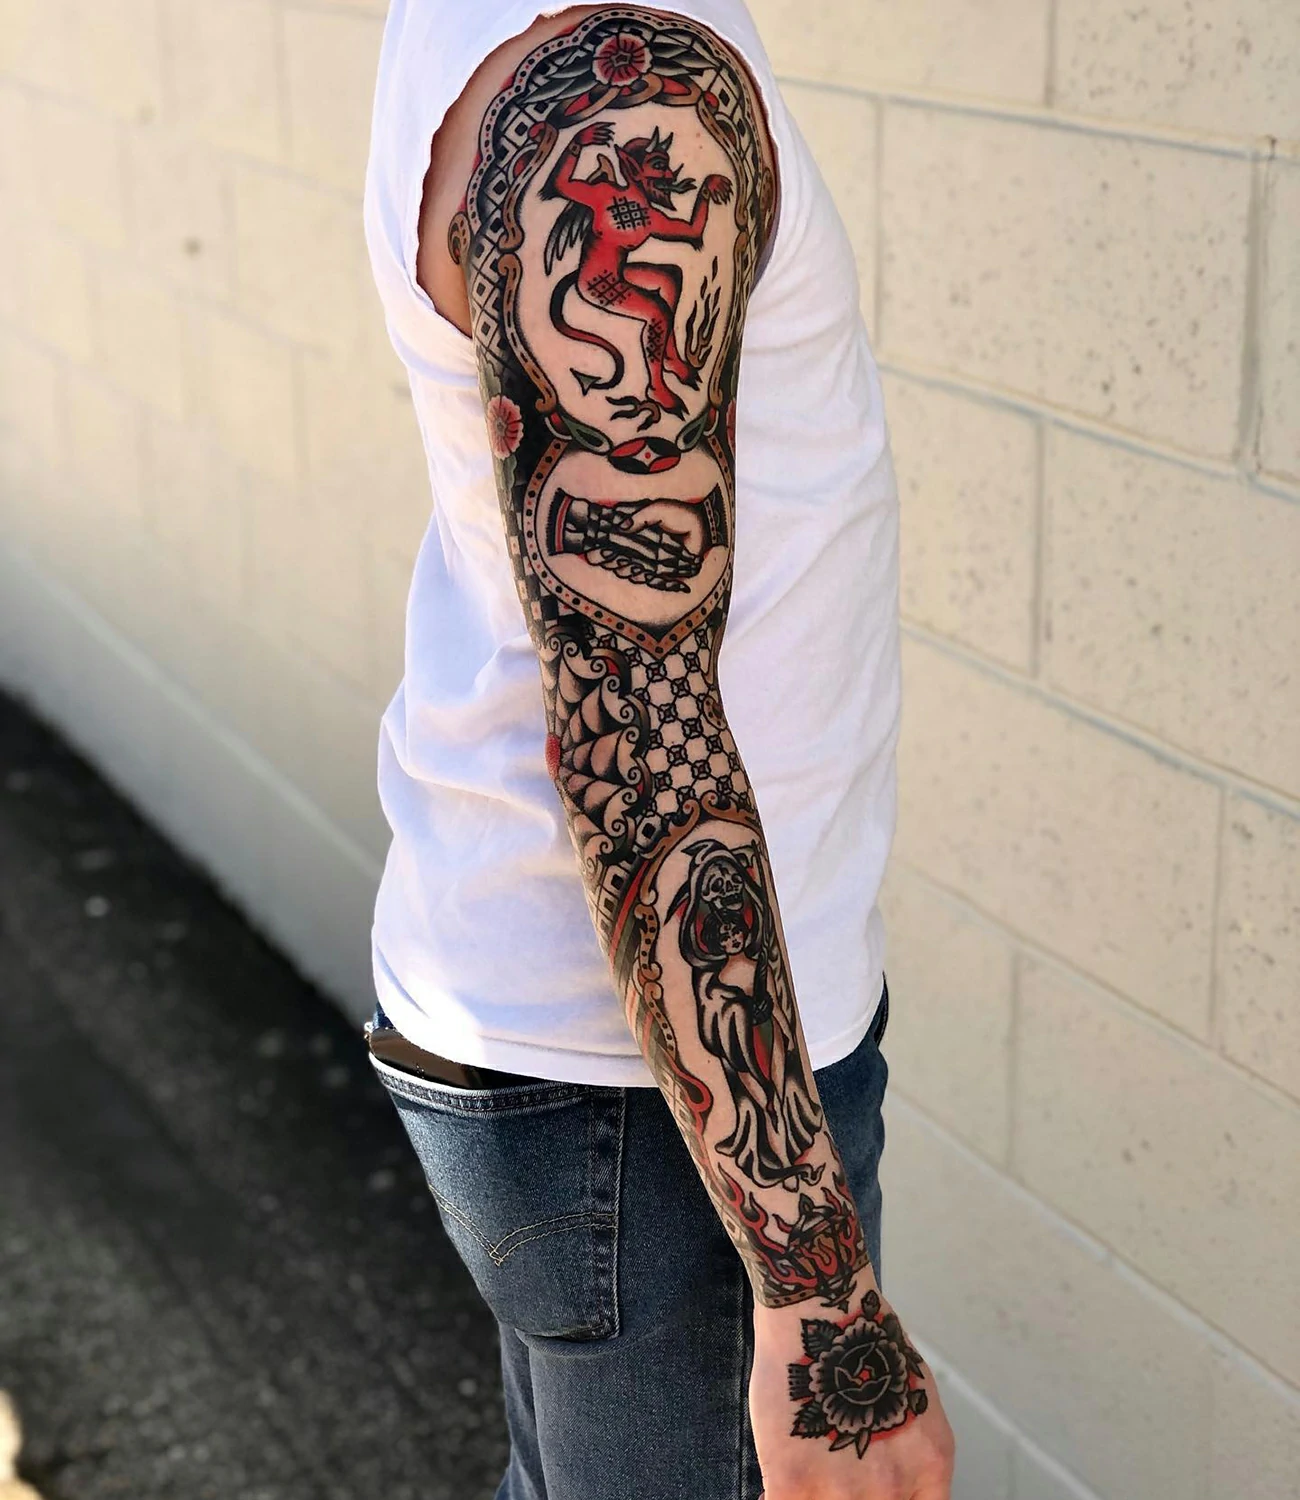 memento mori sleeve tattoo: A full-sleeve tattoo incorporating "memento mori" along with various symbolic elements, creating a cohesive and intricate design.